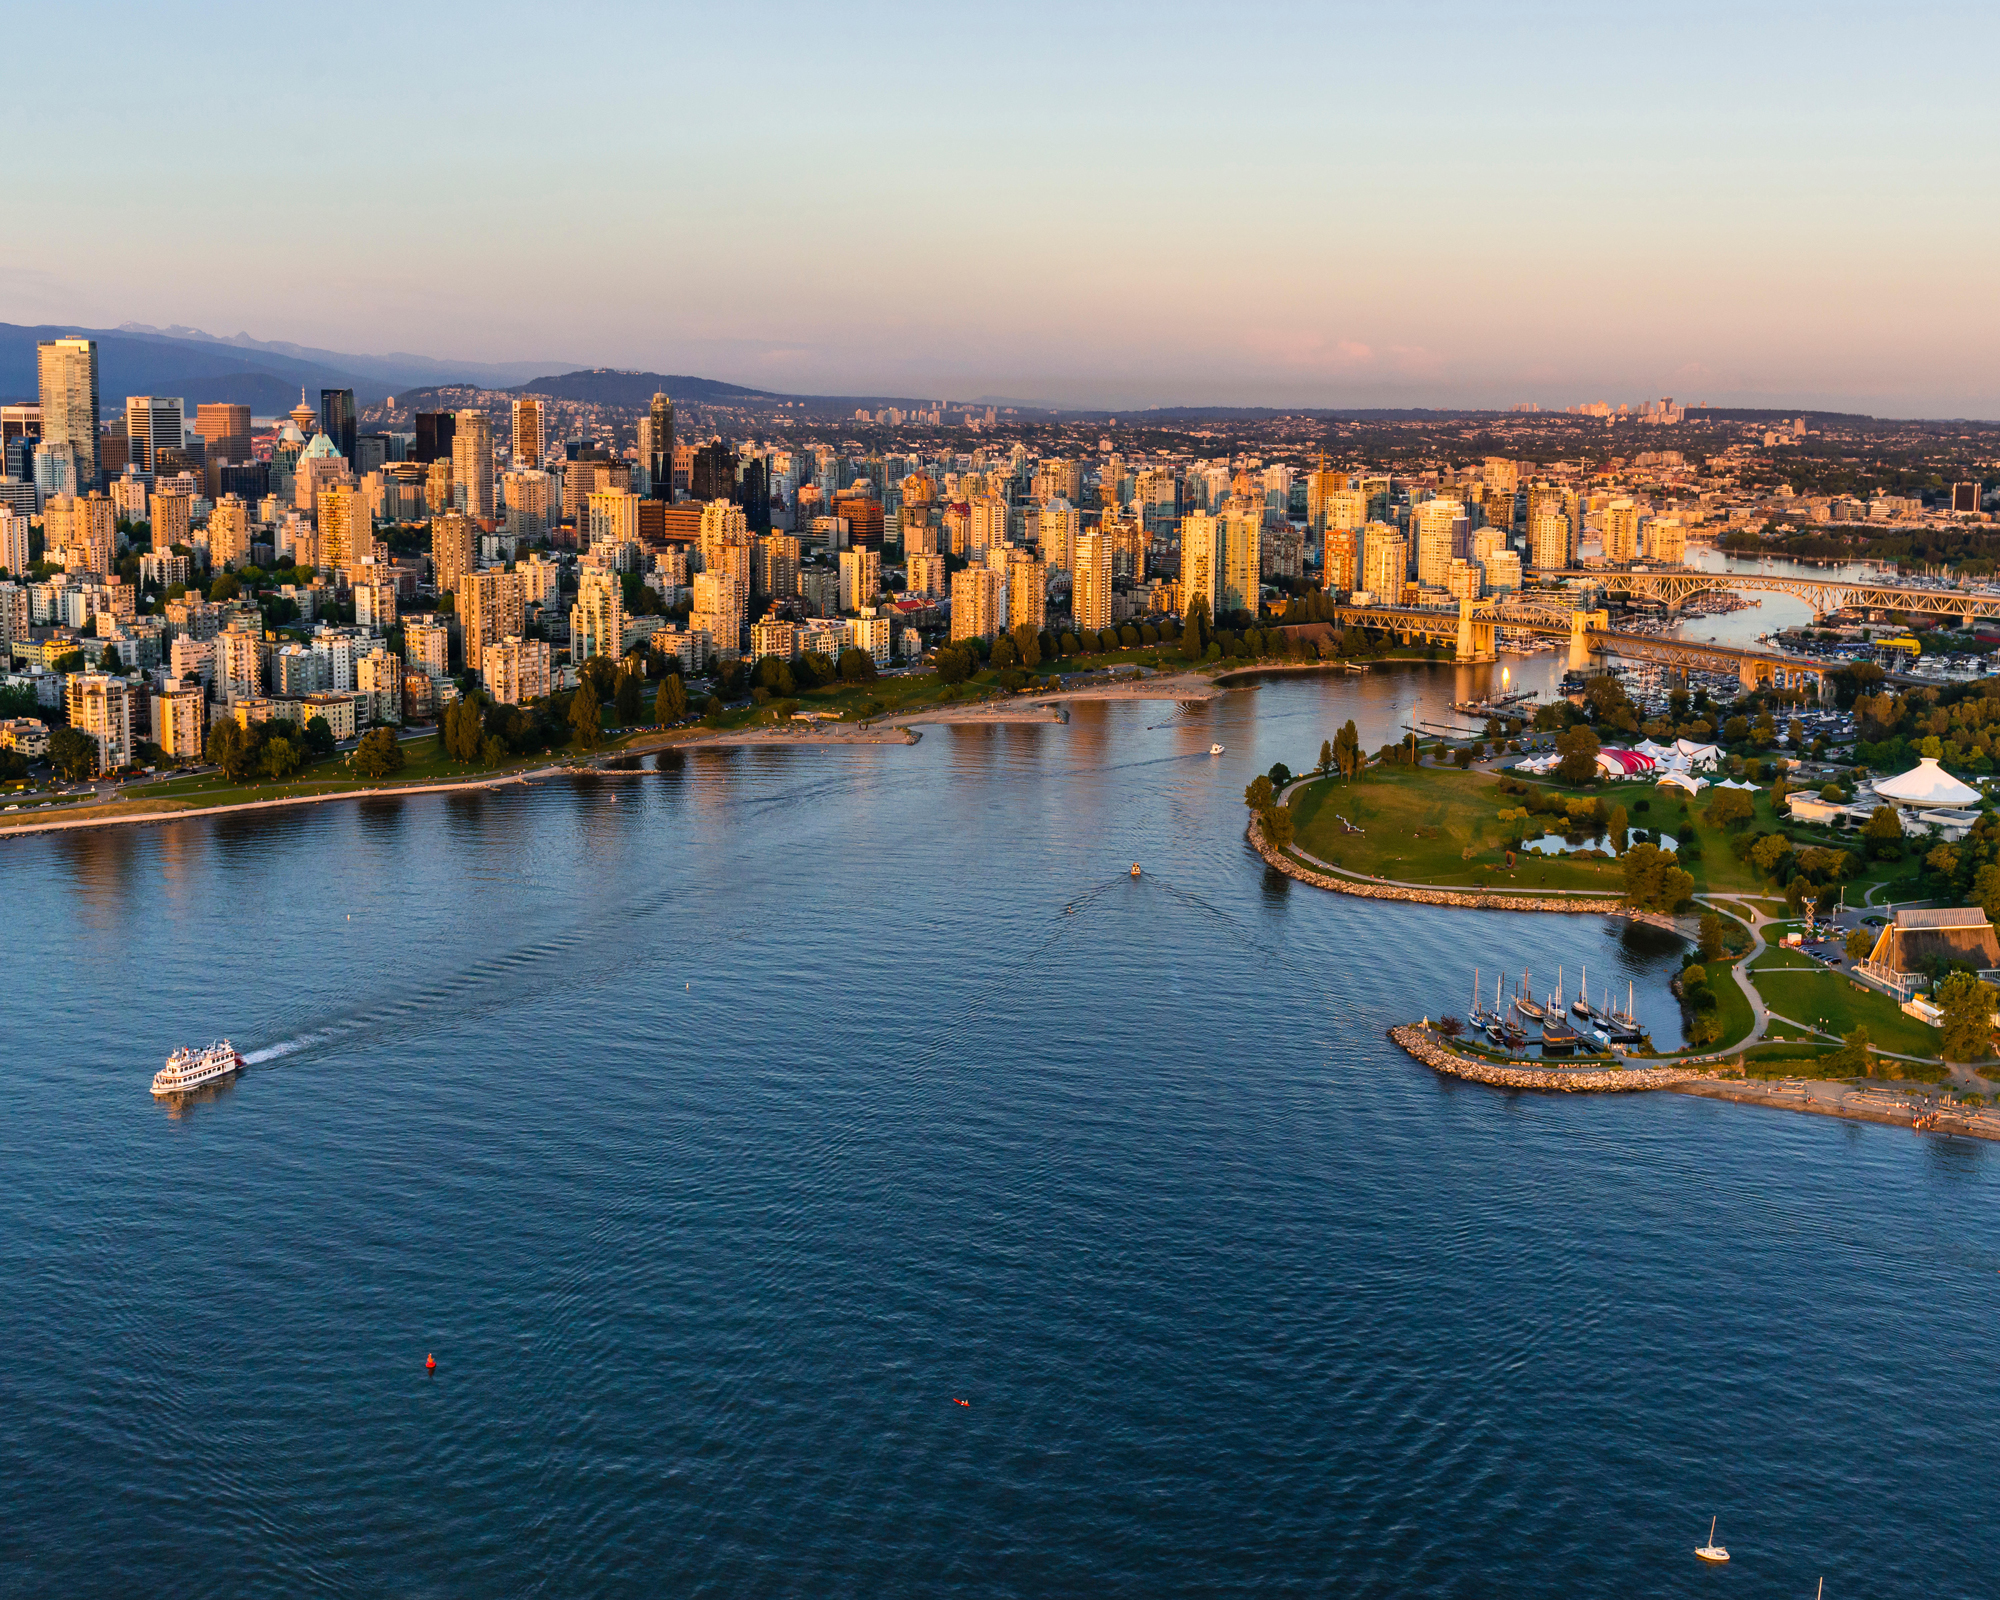 Aireal view of Vancouver, British Columbia, Canada